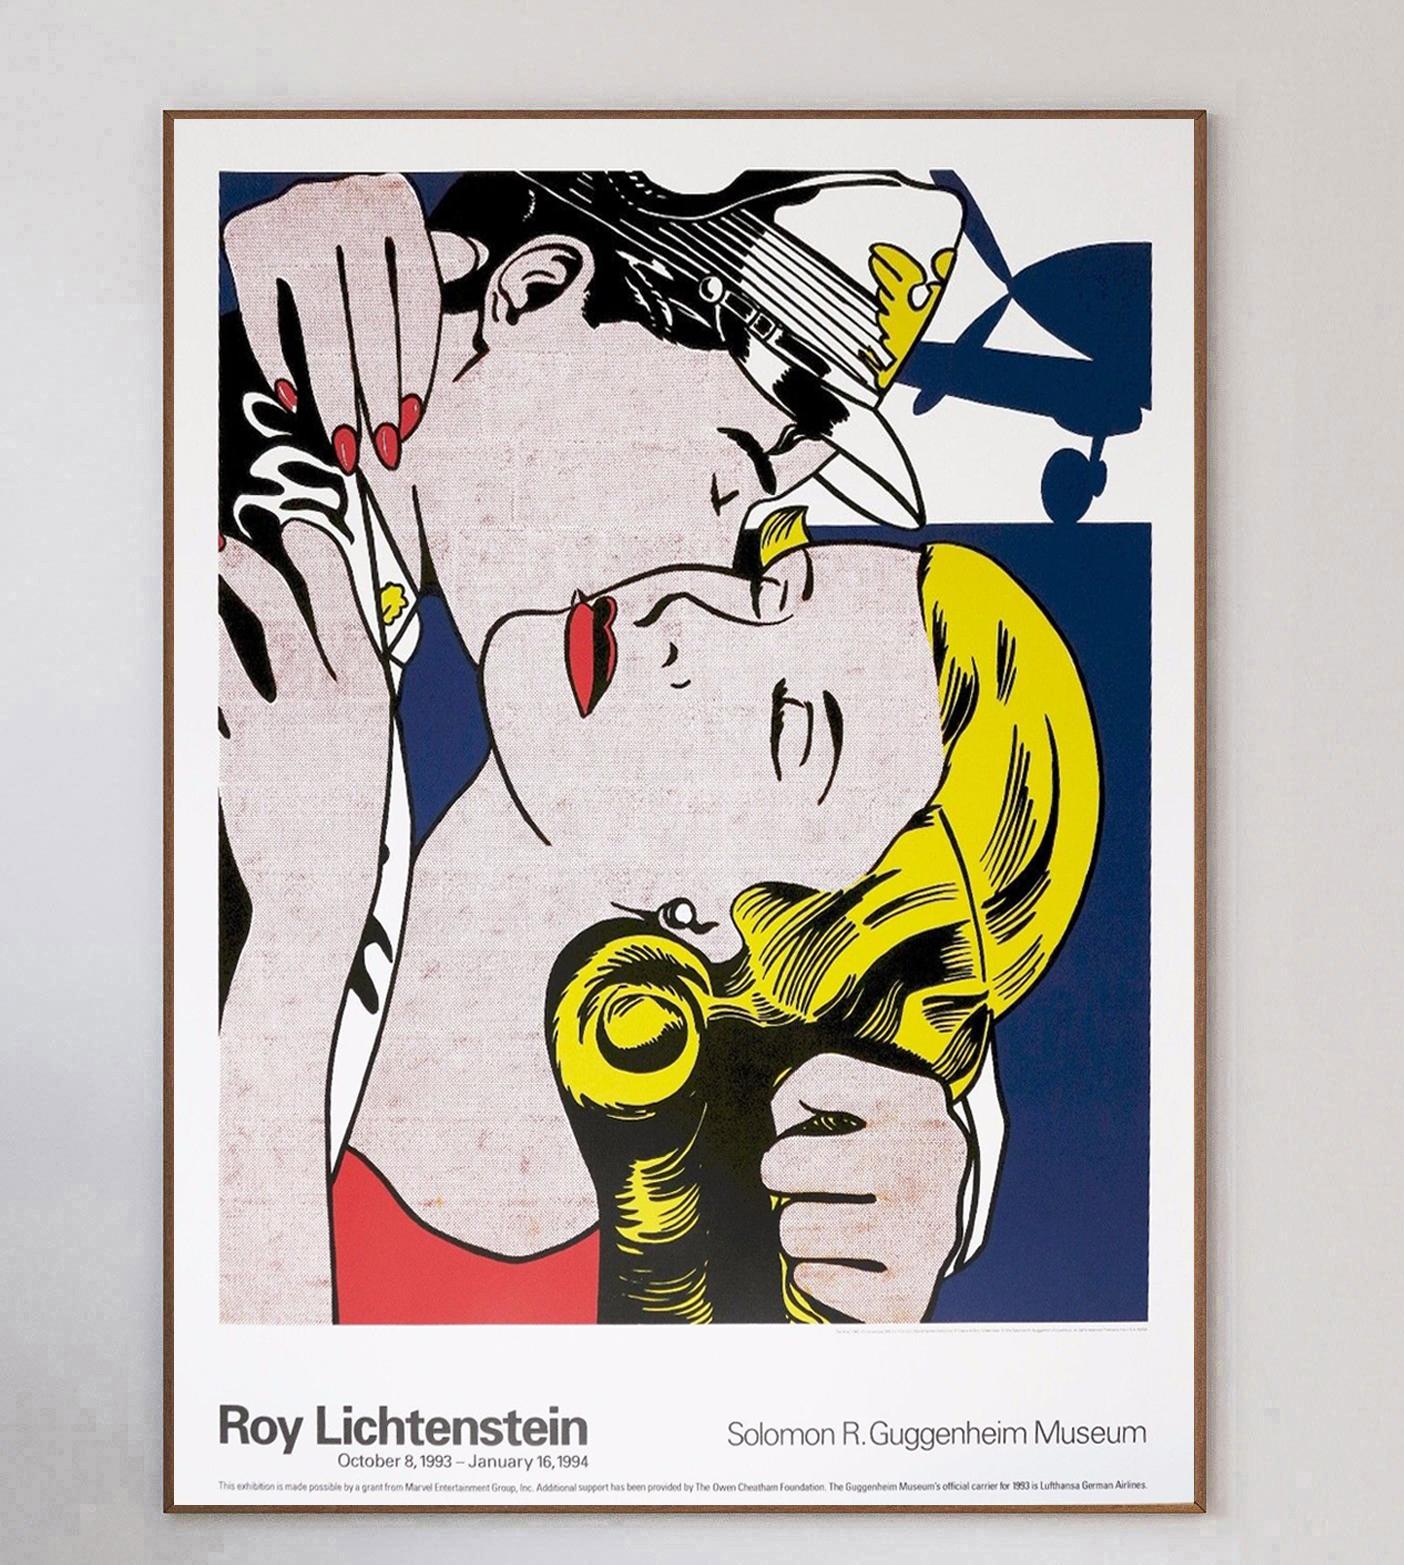 This beautiful poster is for Roy Lichtenstein's exhibition at the iconic Solomon R. Guggenheim Museum in New York in 1993 and features Lichtenstein's 1961 artwork 